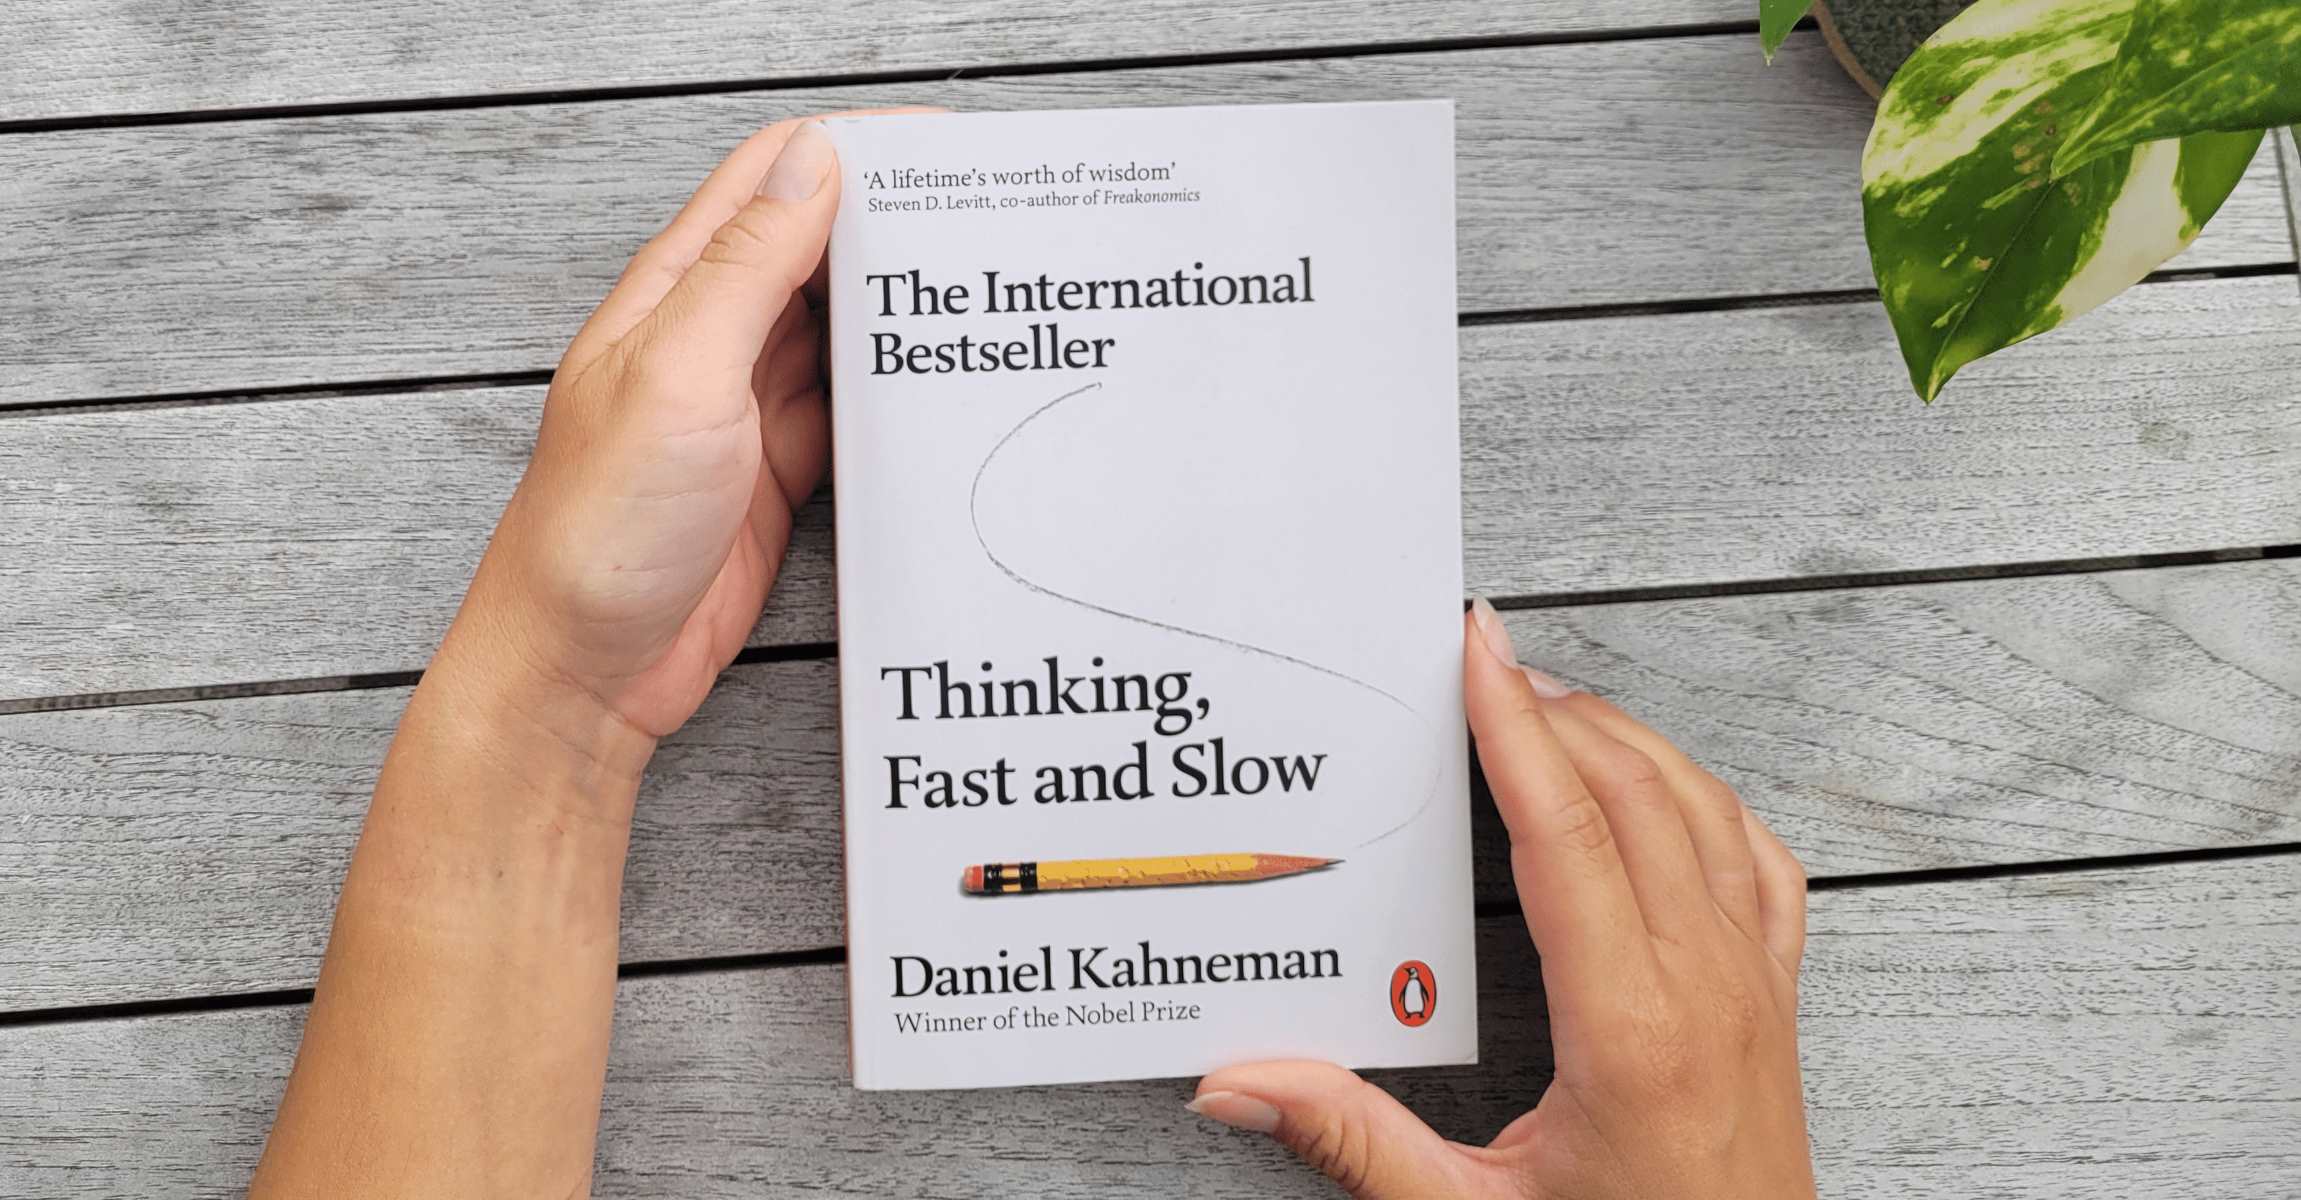 11-fascinating-facts-about-thinking-fast-and-slow-daniel-kahneman